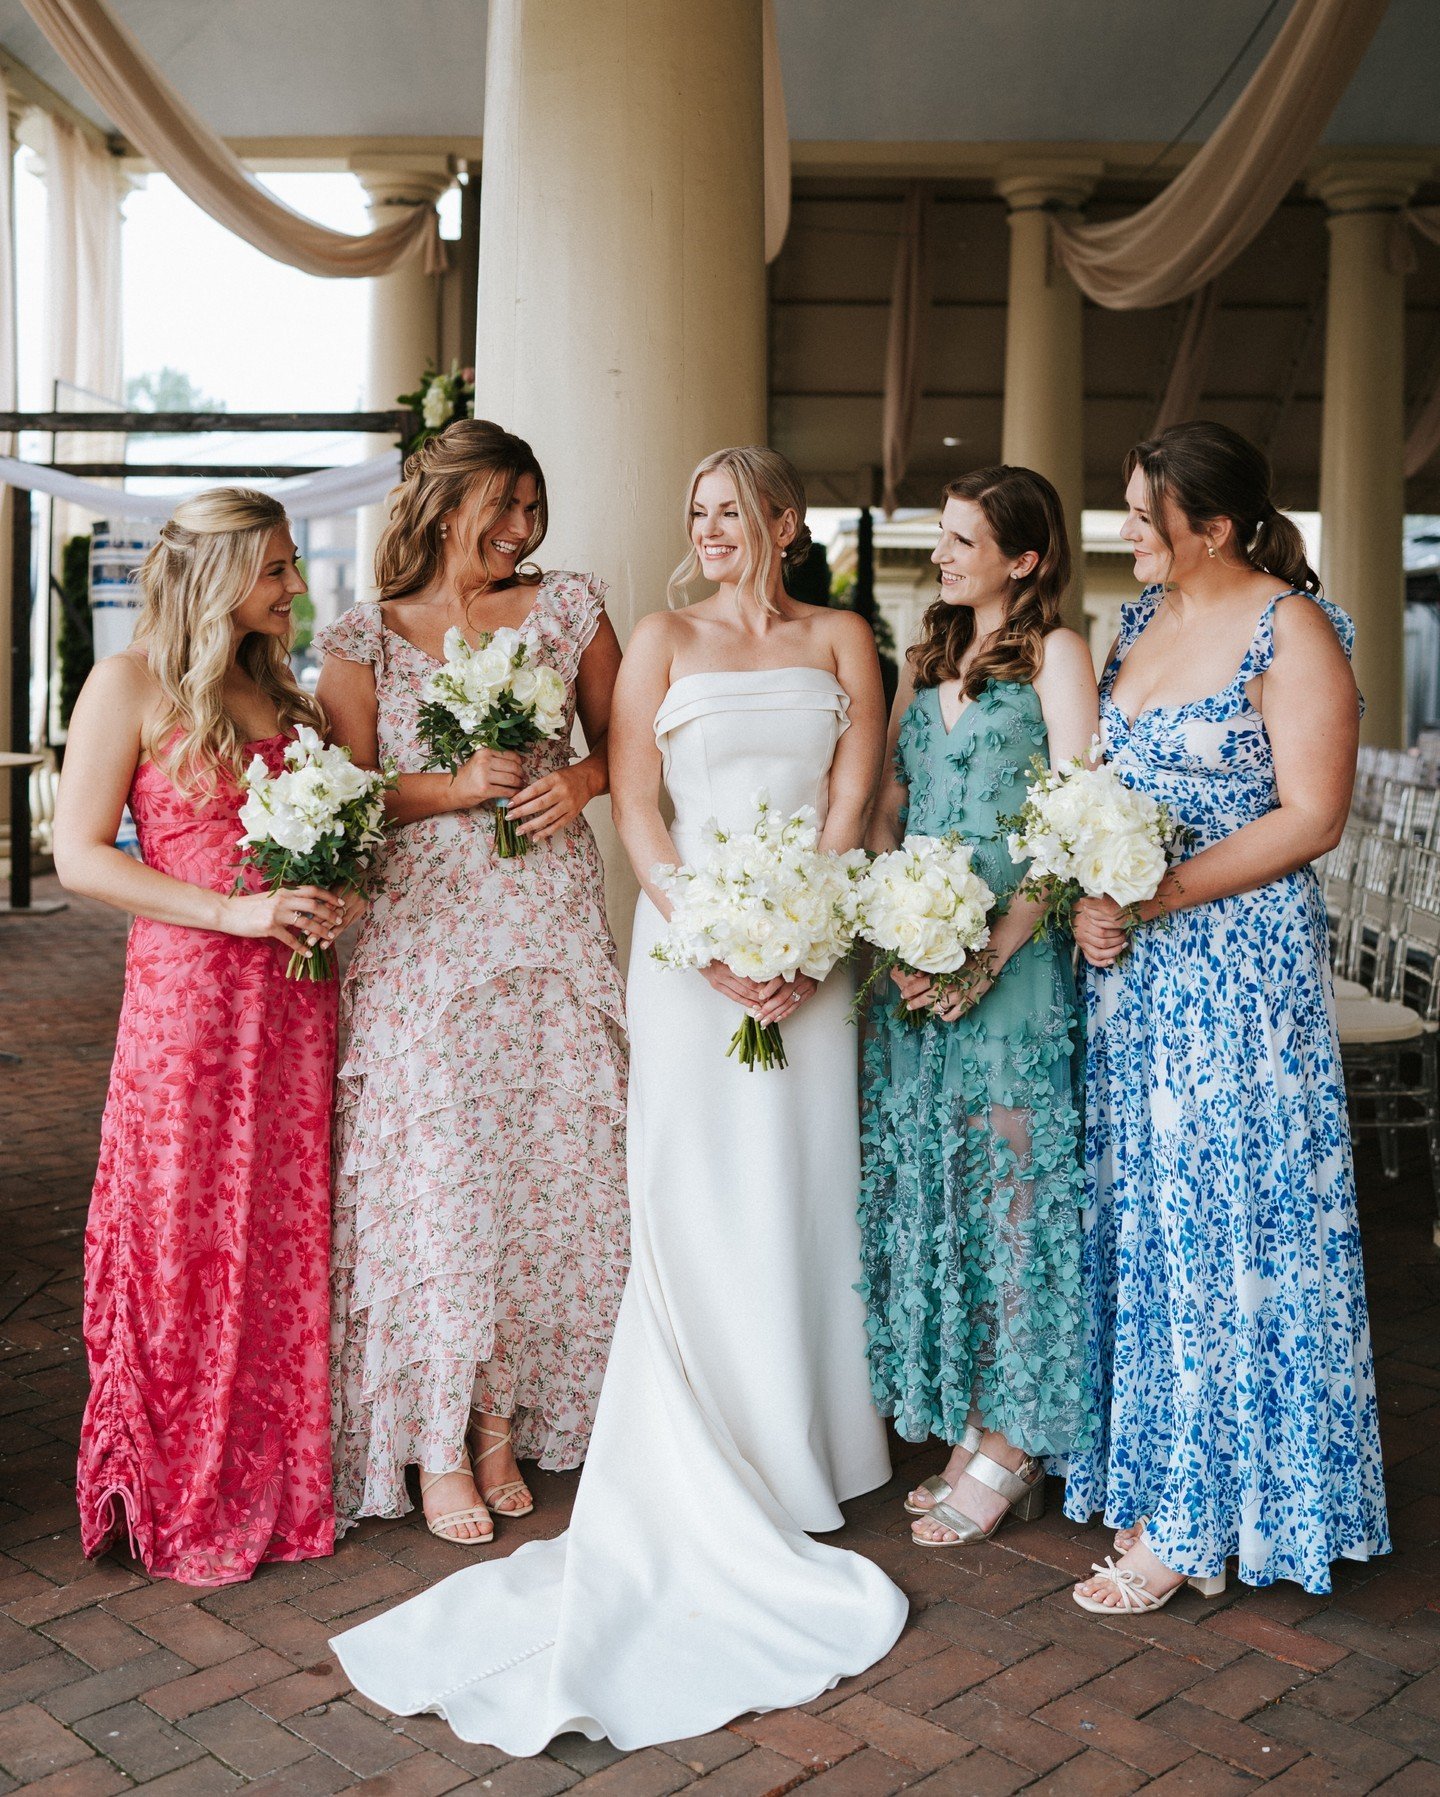 Spring blooms aren't the only vibrant hues today&mdash;we've got a rainbow of colorful dresses and a bridal party that slays 🌈💍🤍

📸 @rachelrosensteinphoto